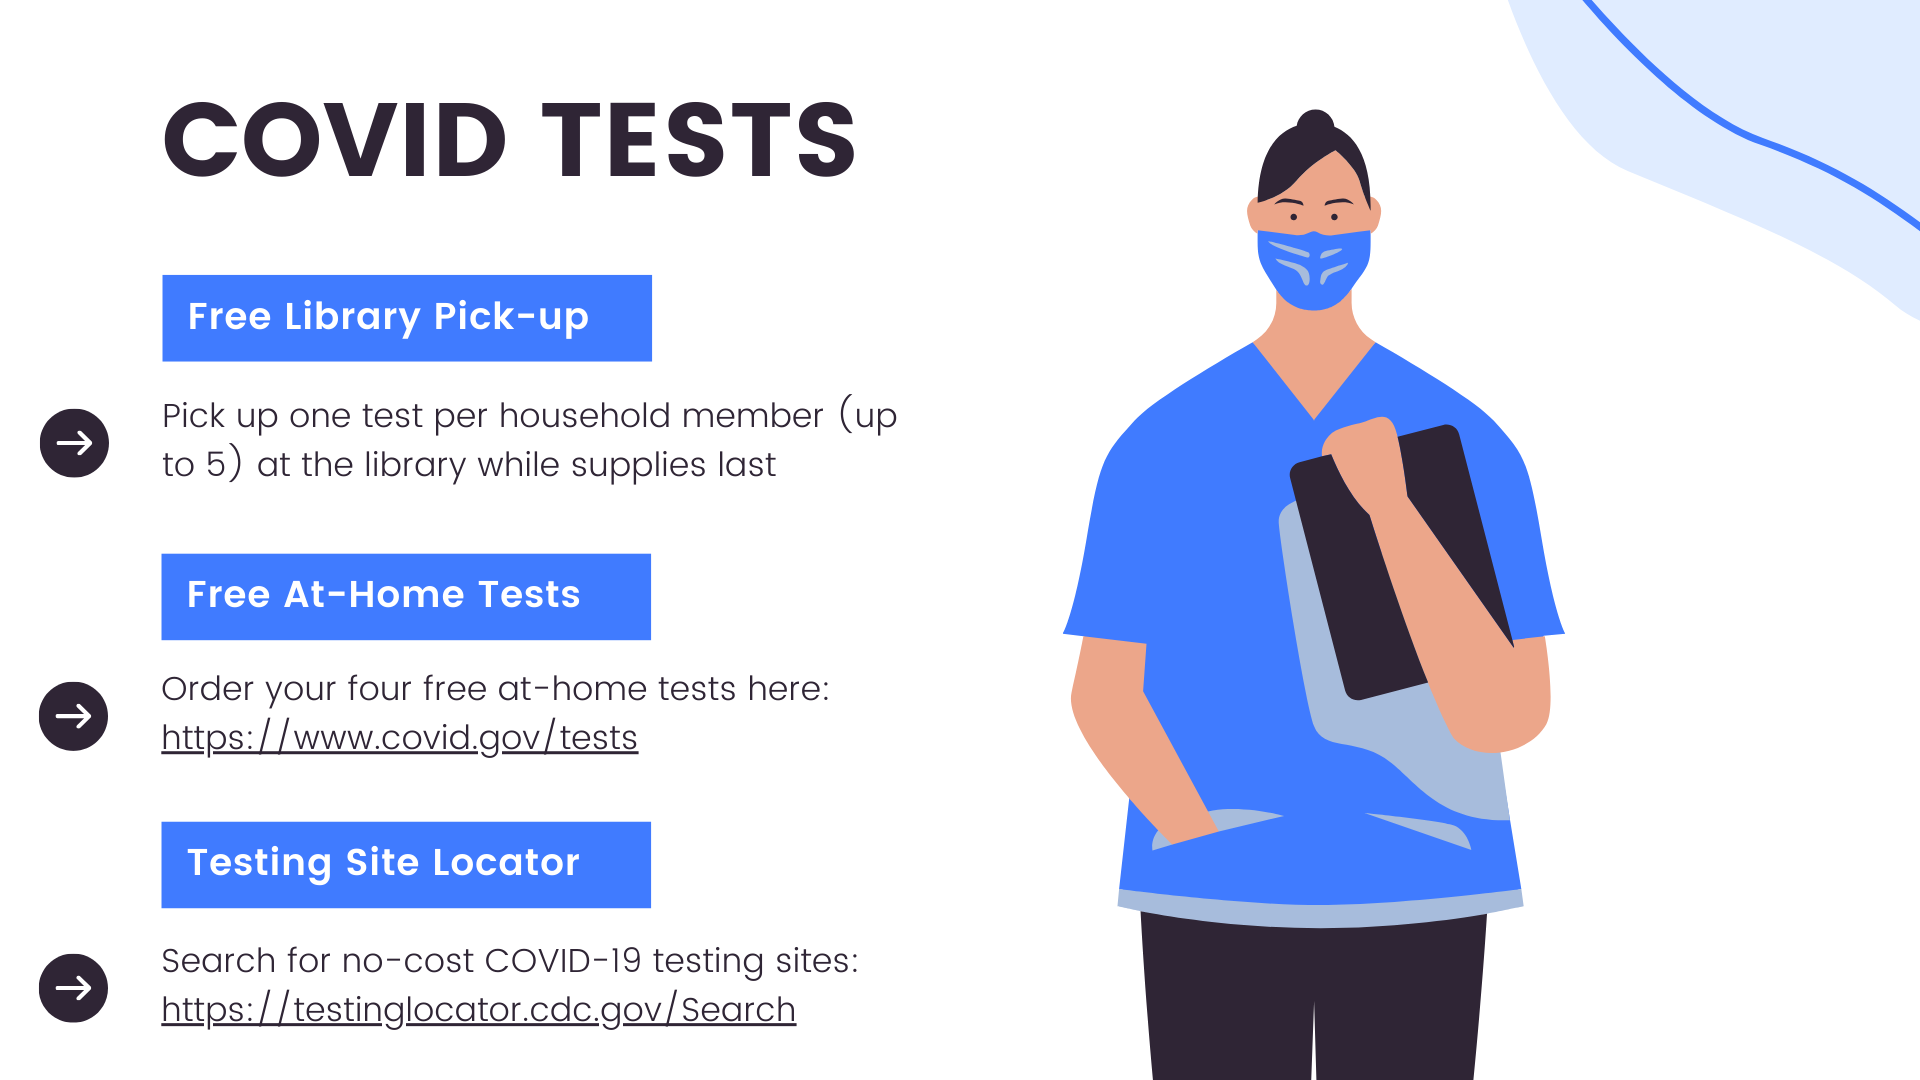 Covid tests are available online or through USPS. A link to testing sites is provided.